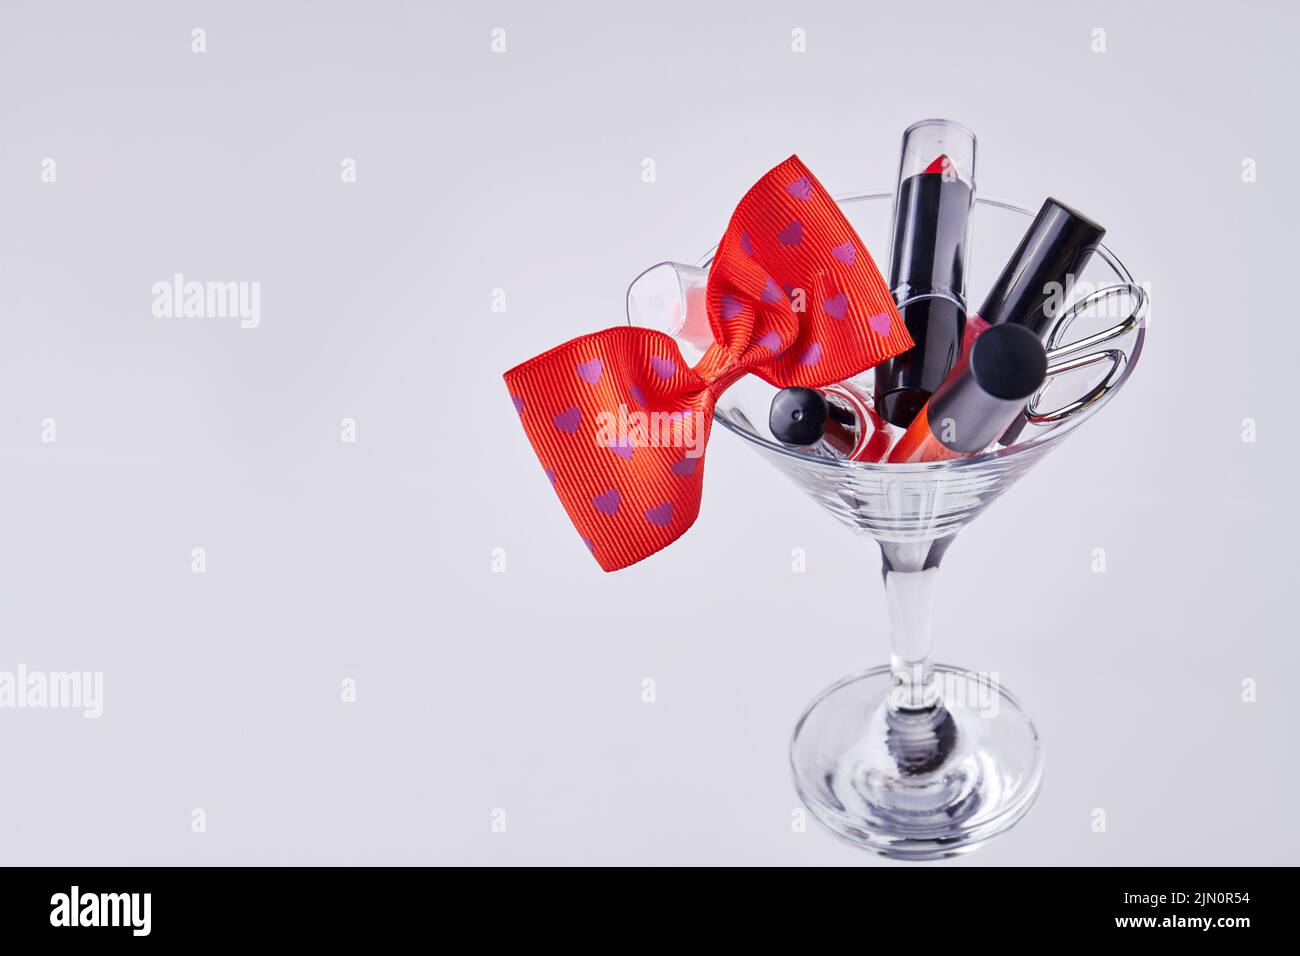 Makeup accessories and red bow tie in a cocktail glass. Isolated on white background. Stock Photo